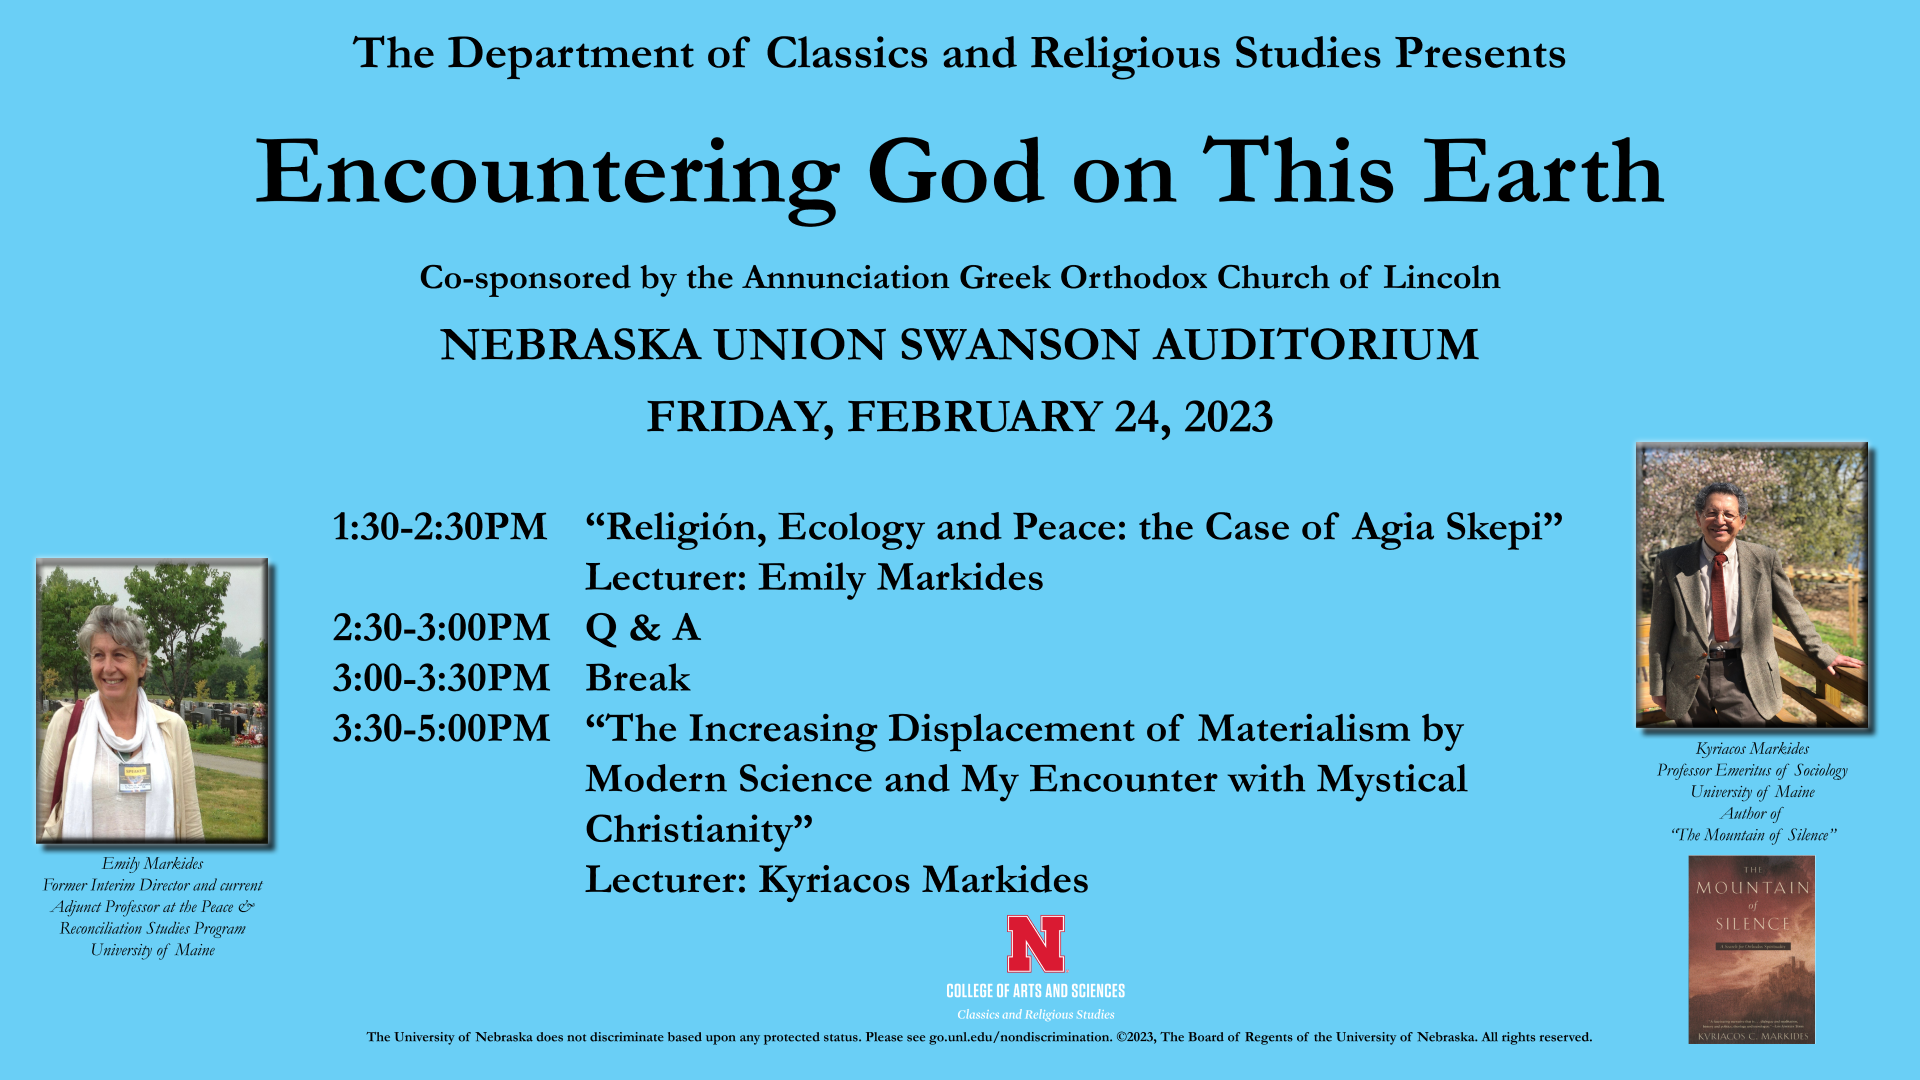 Encountering God on this Earth event flyer